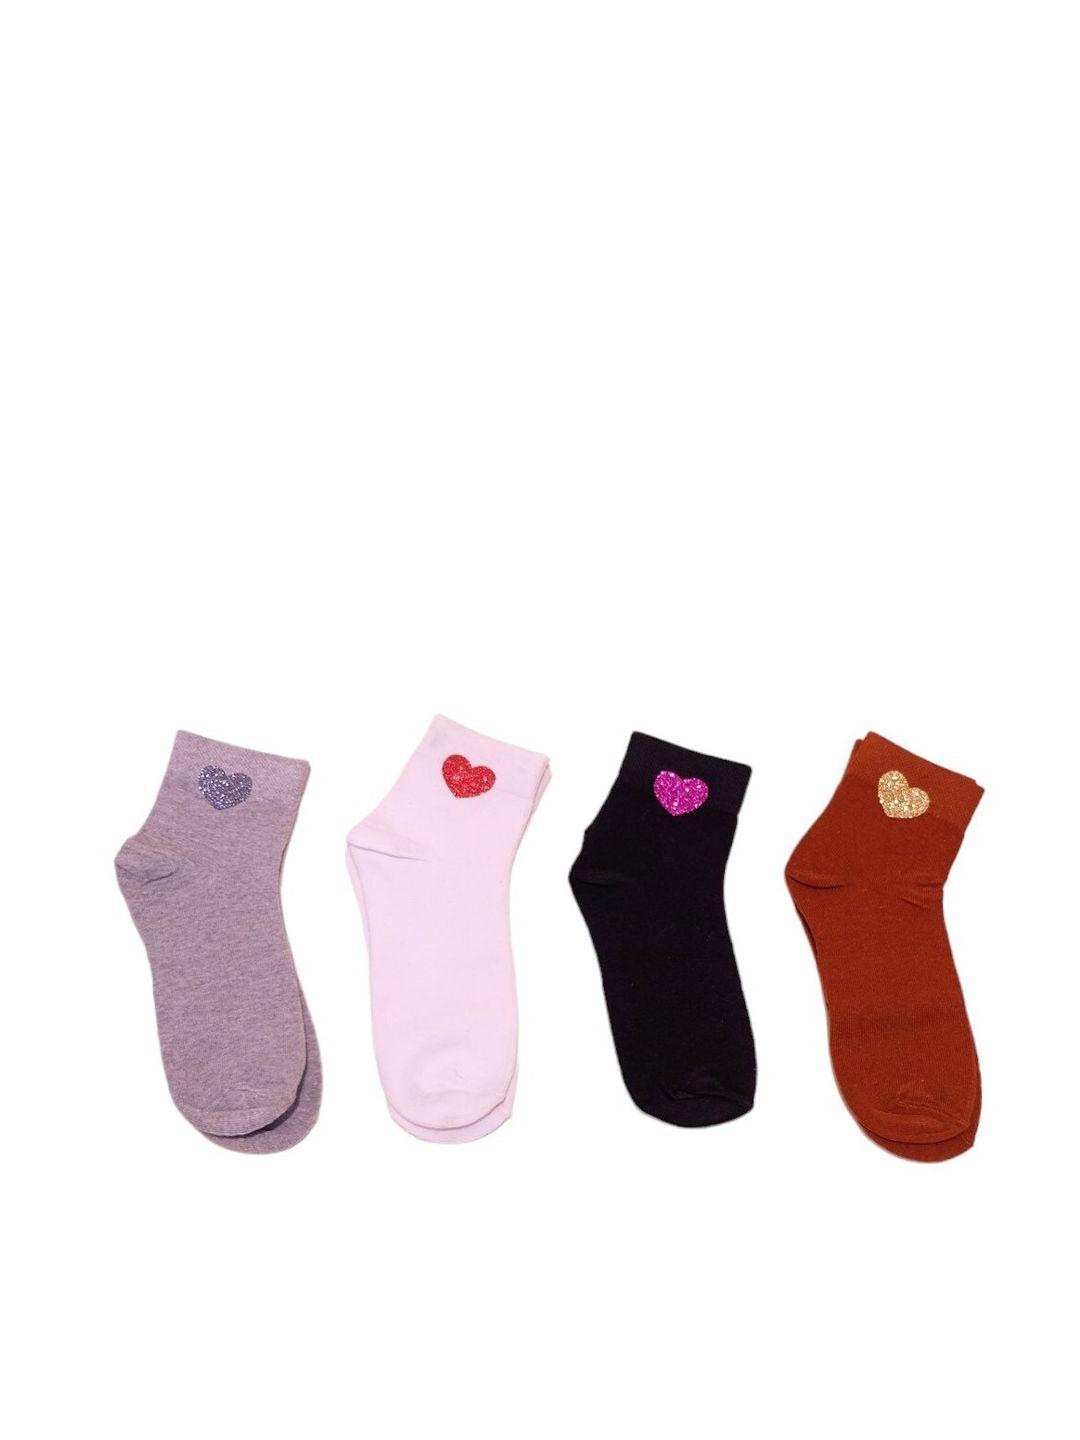 tipy tipy tap girls pack of 4 cotton ankle length socks